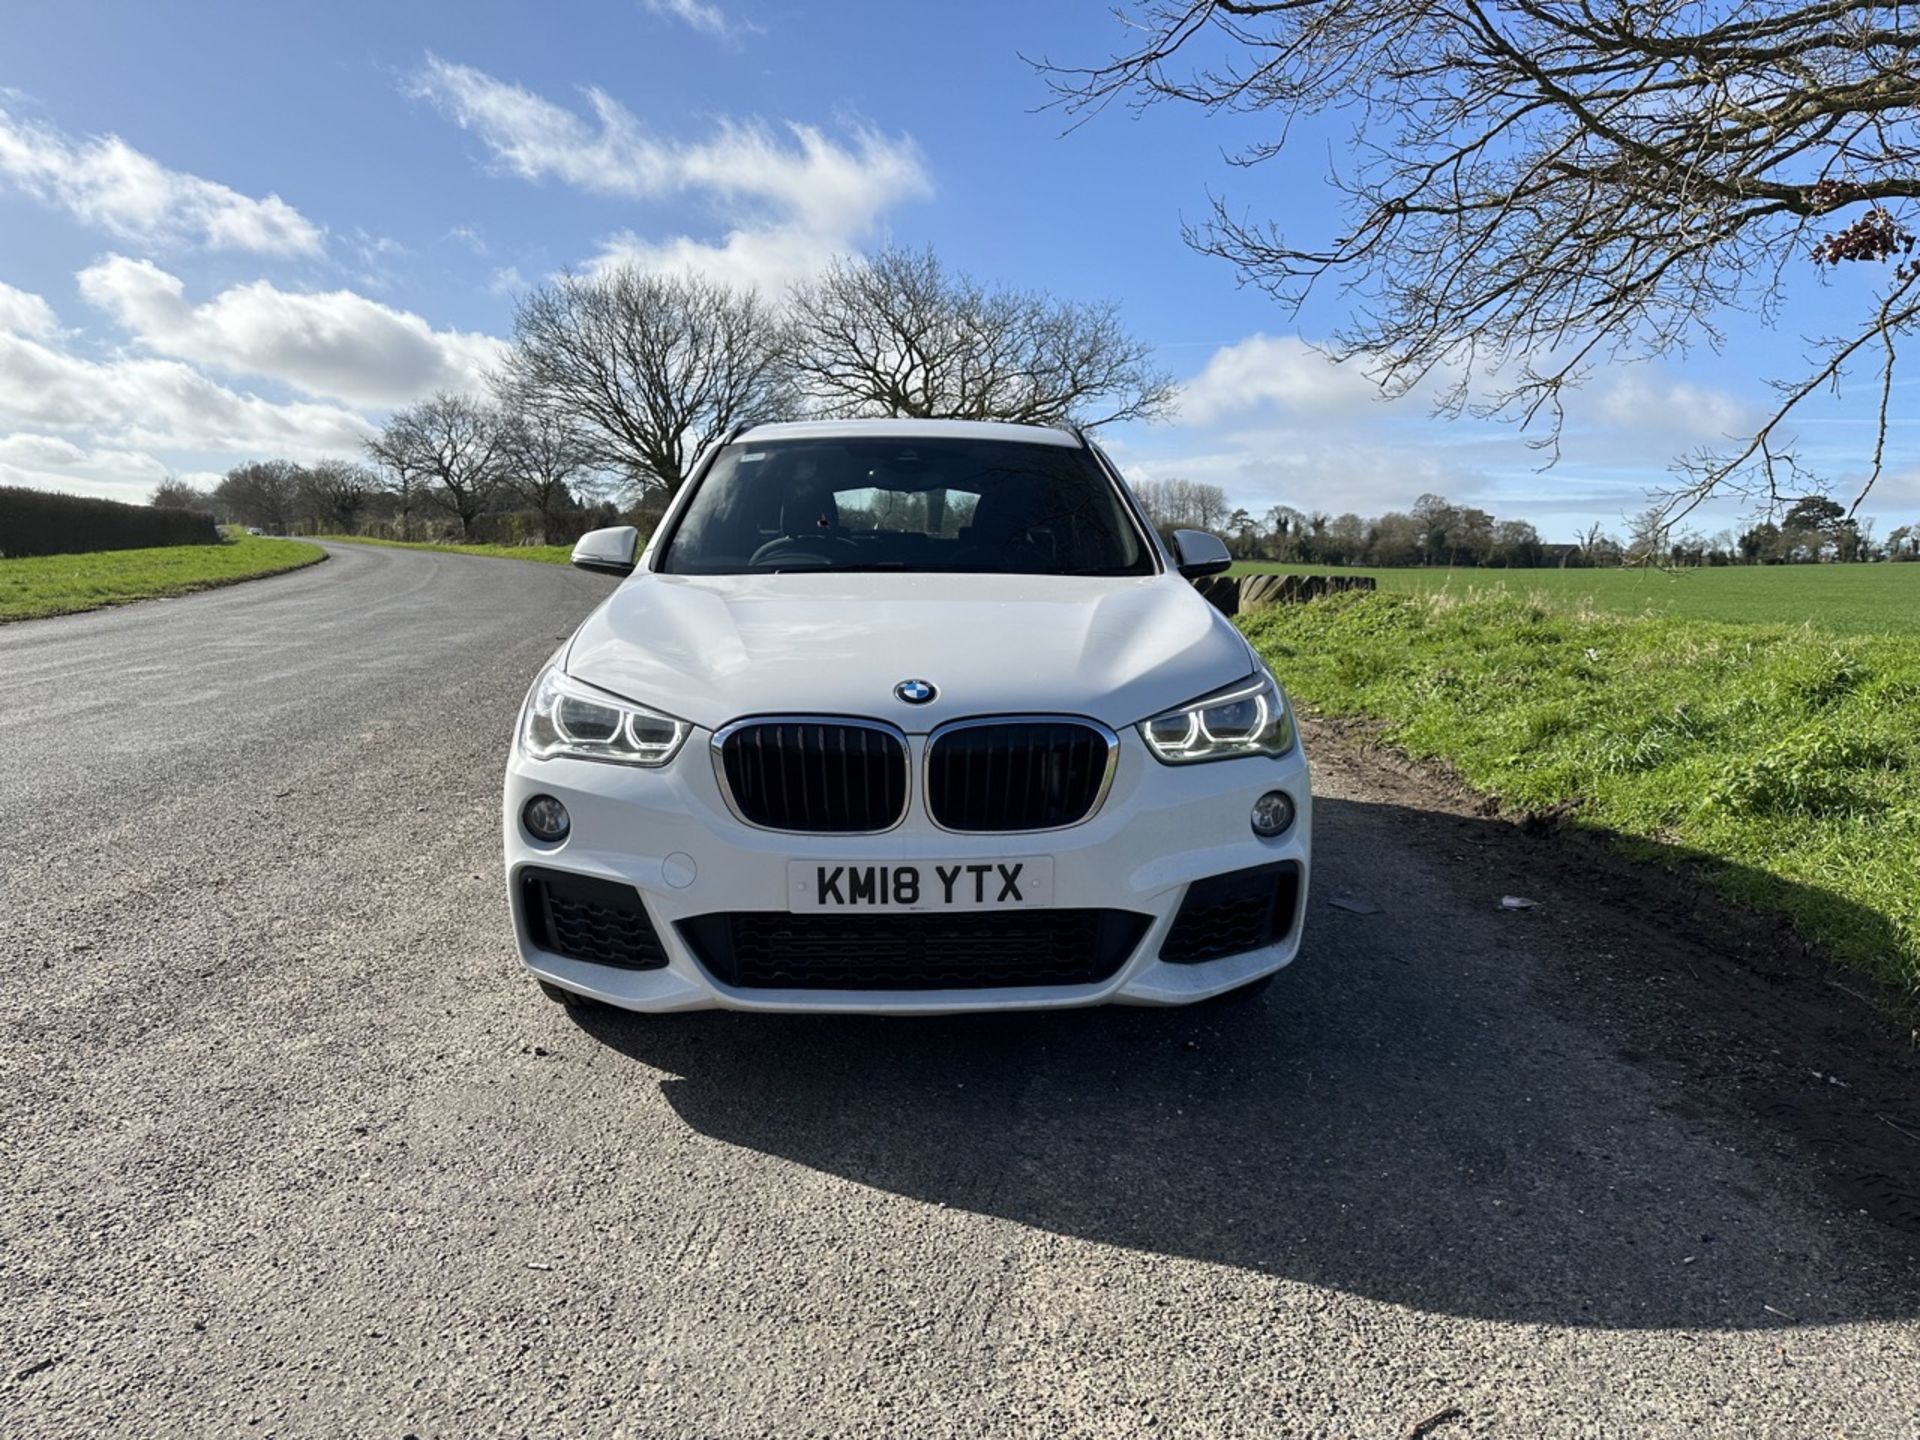 BMW X1 Xdrive20i M Sport Auto 20i - 2018 - 16.5k MILES ONLY - M SPORT Seats/badging - Image 2 of 22